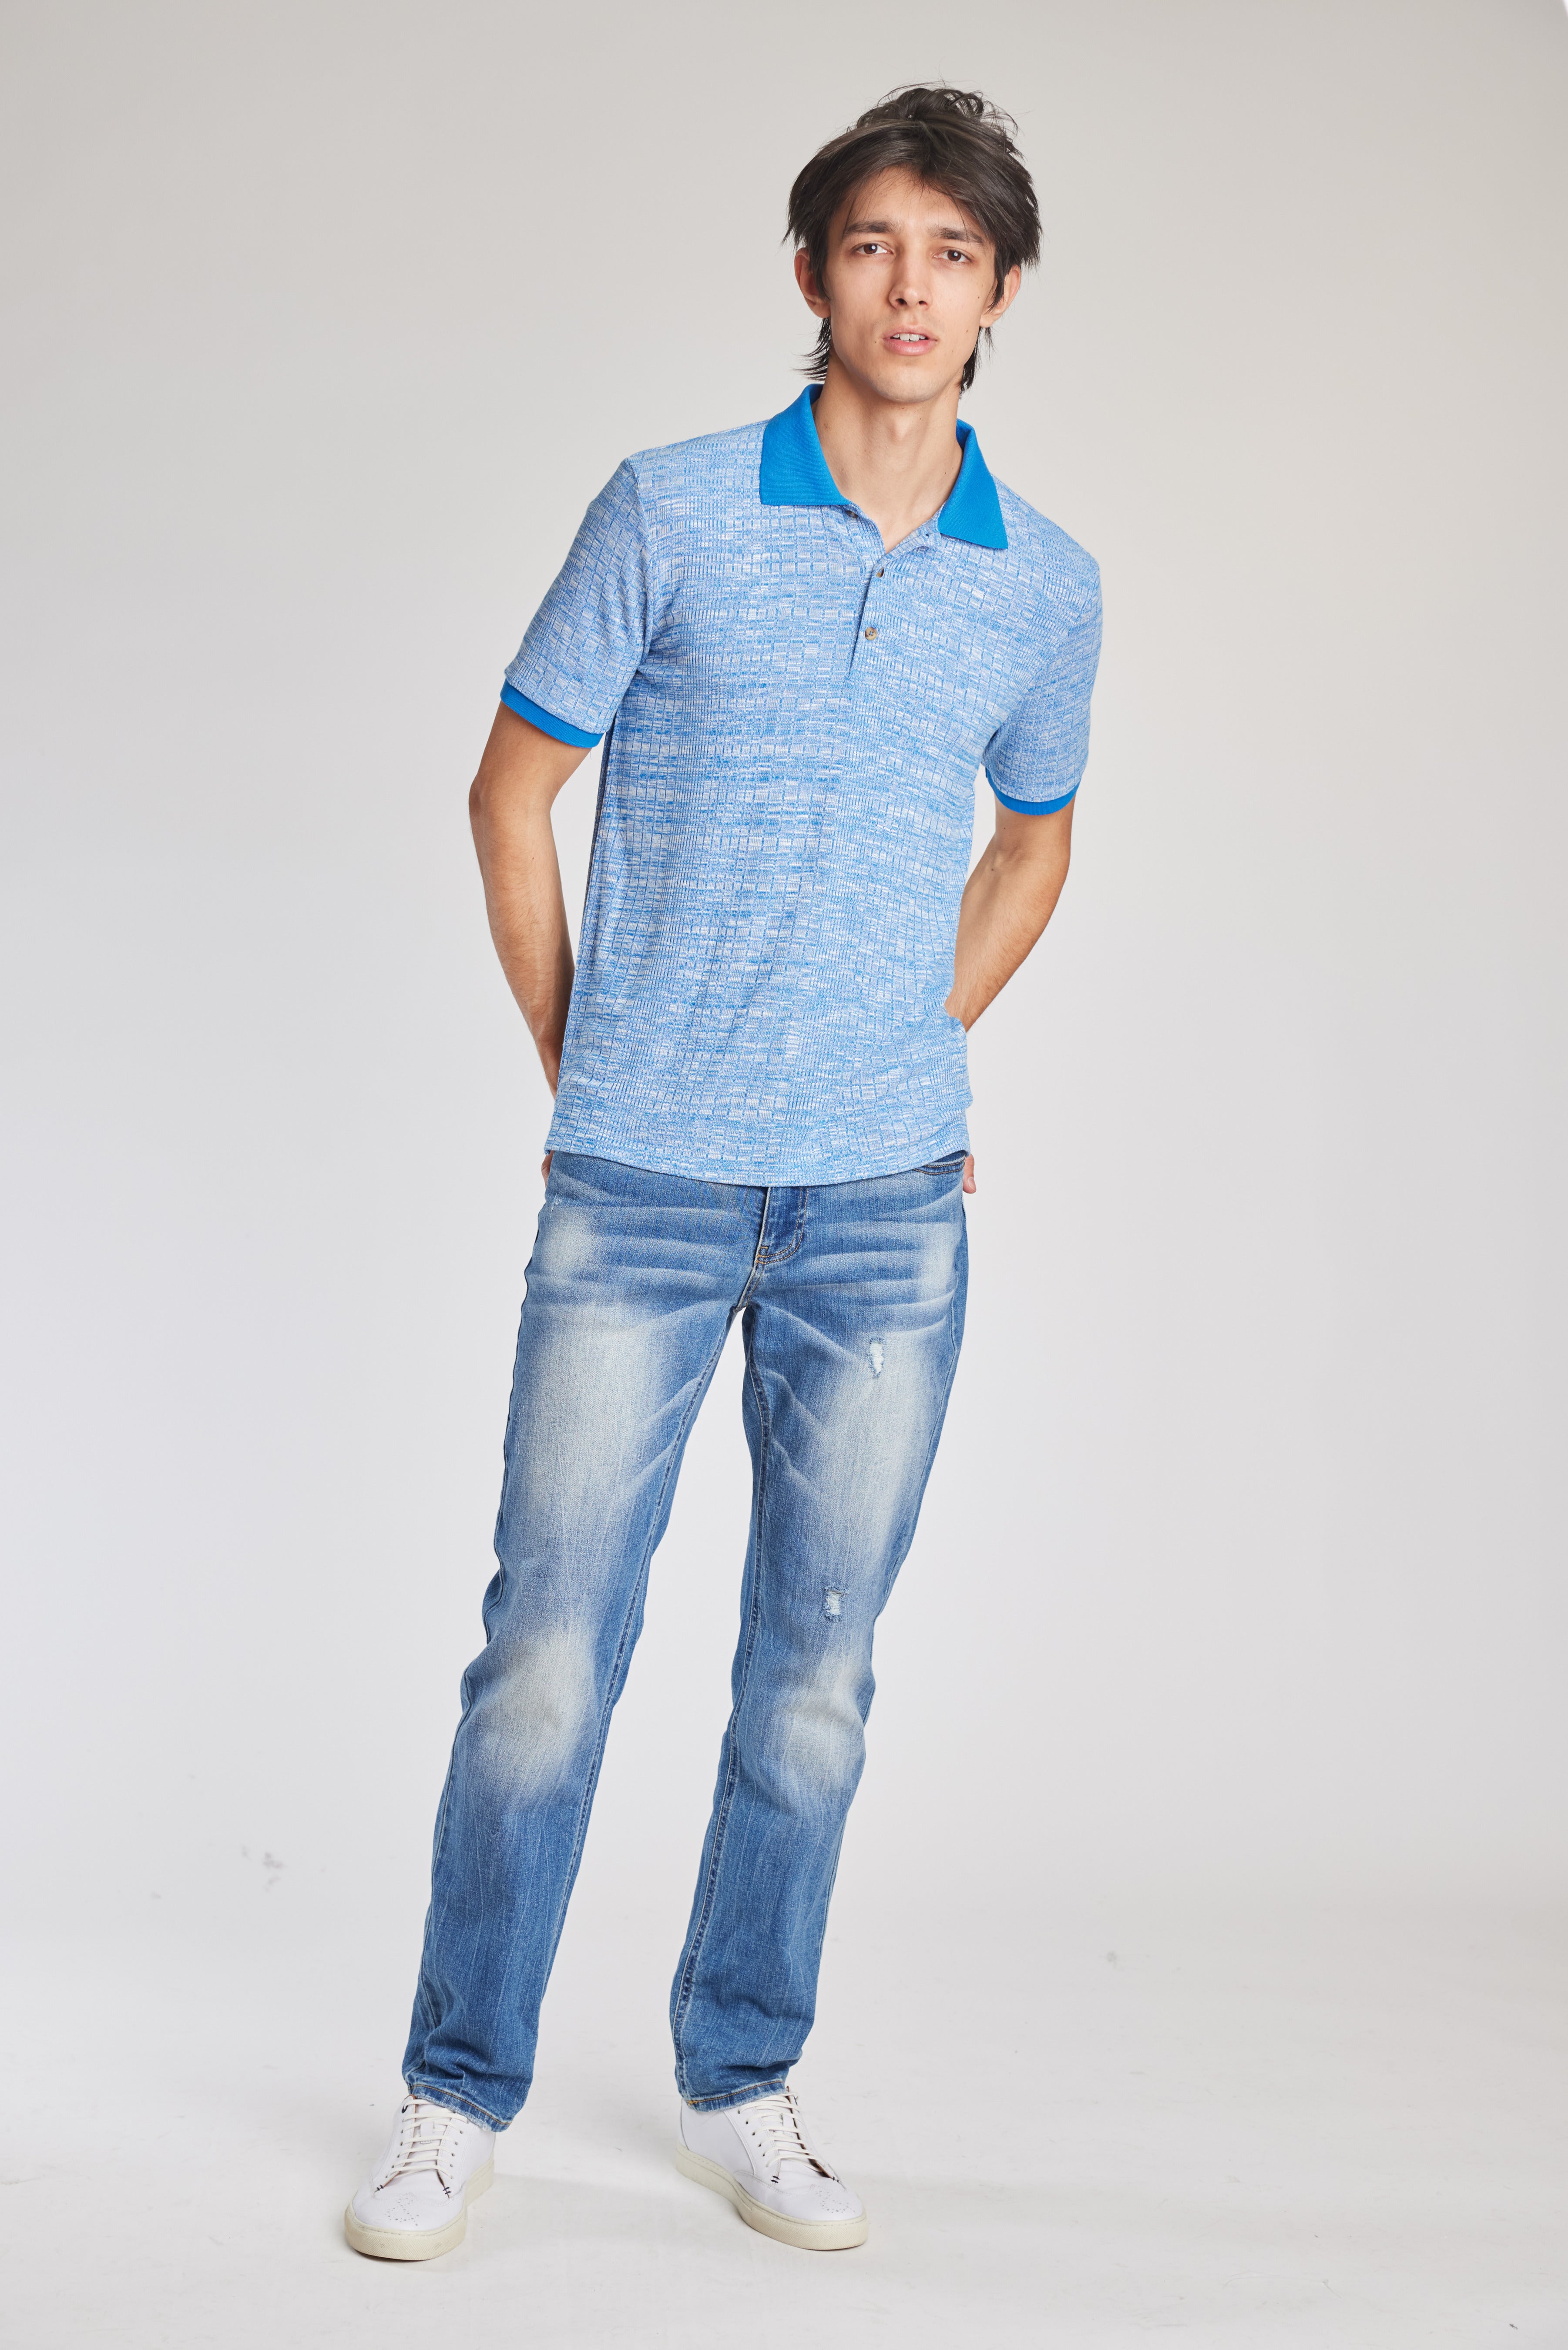 Funday Variegated Polo - Royal Blue